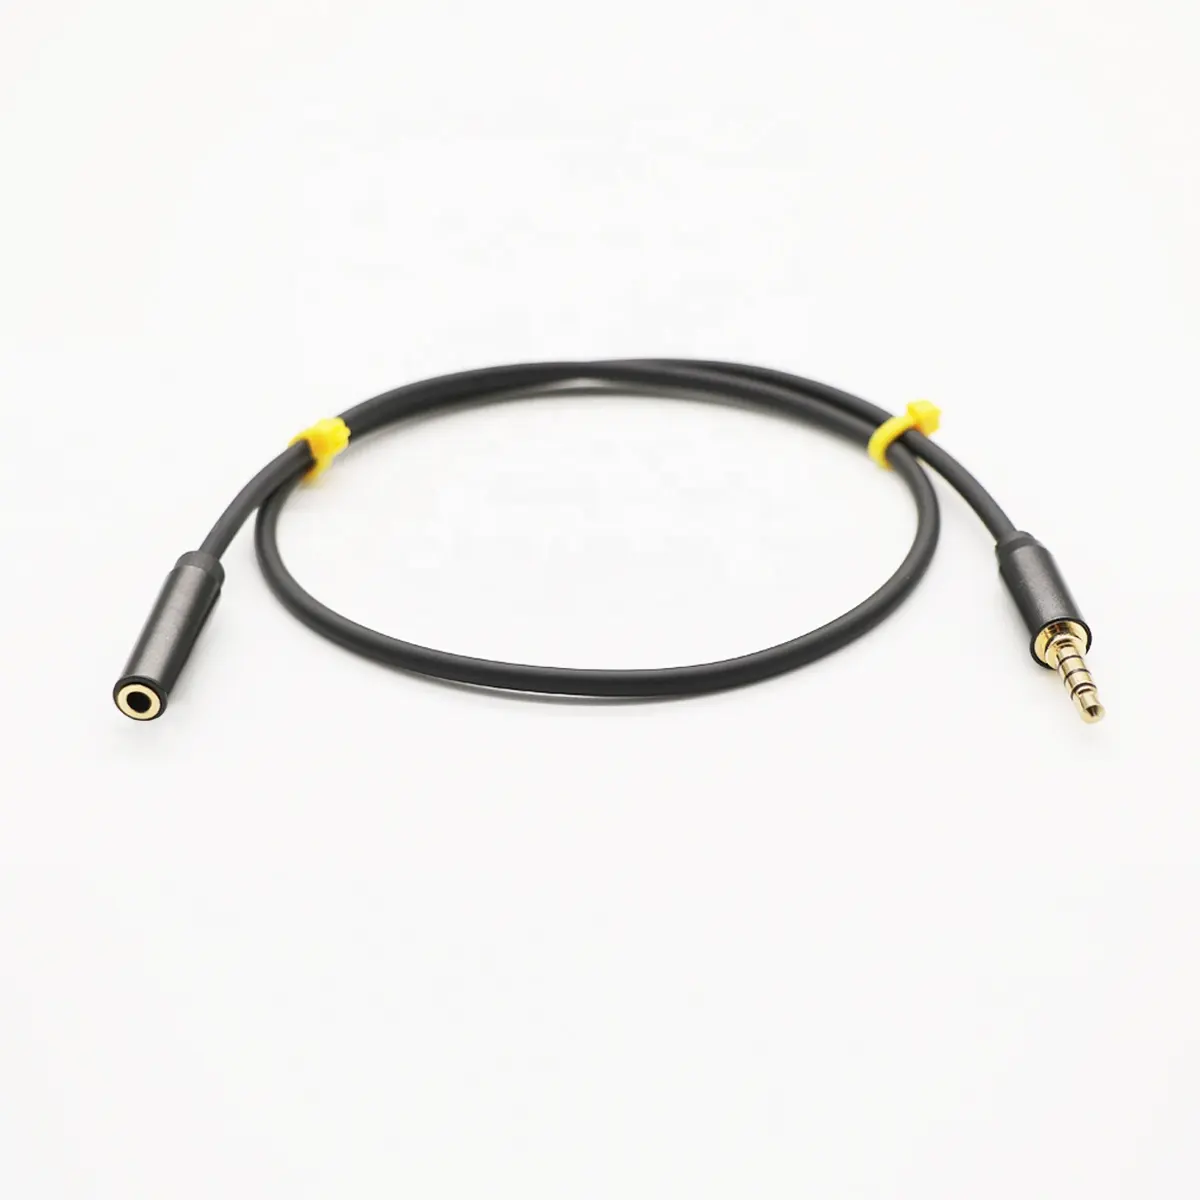 3.5mm TRRS to TRS Cable Adaptor Compatible for Rode SC3 smartLav Microphone Nikon Canon Sony Recorders